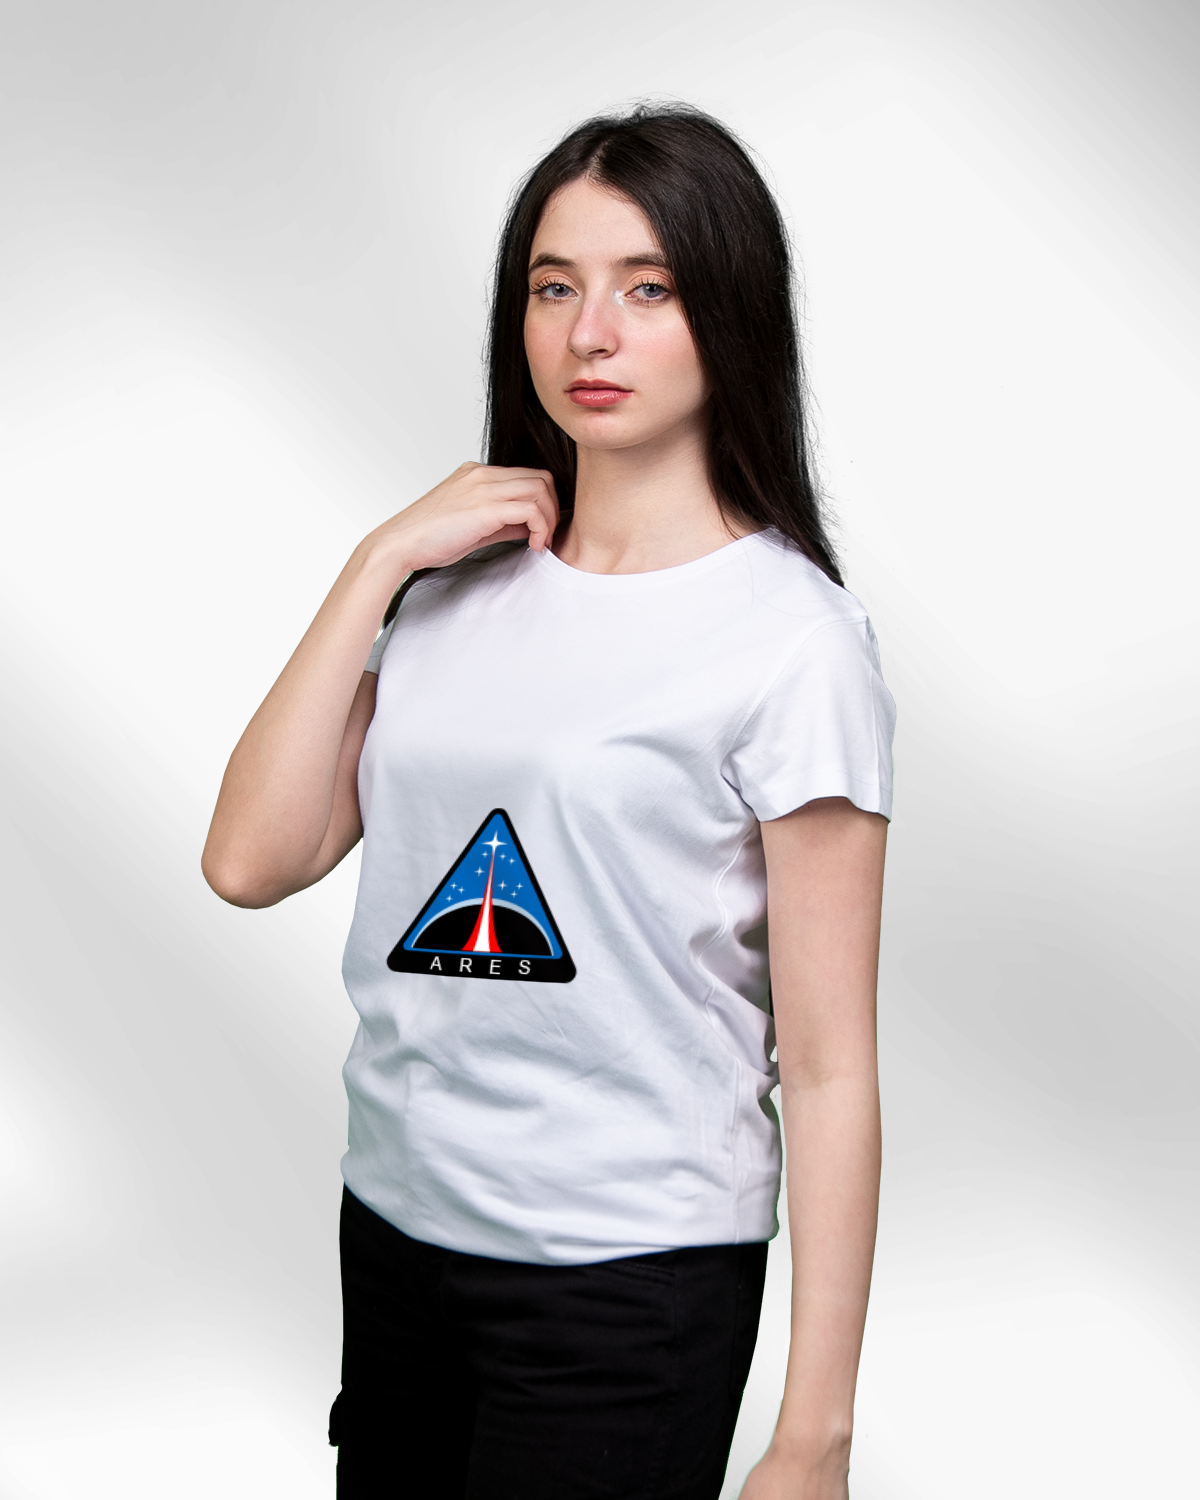 T-shirt For Women (Ares)